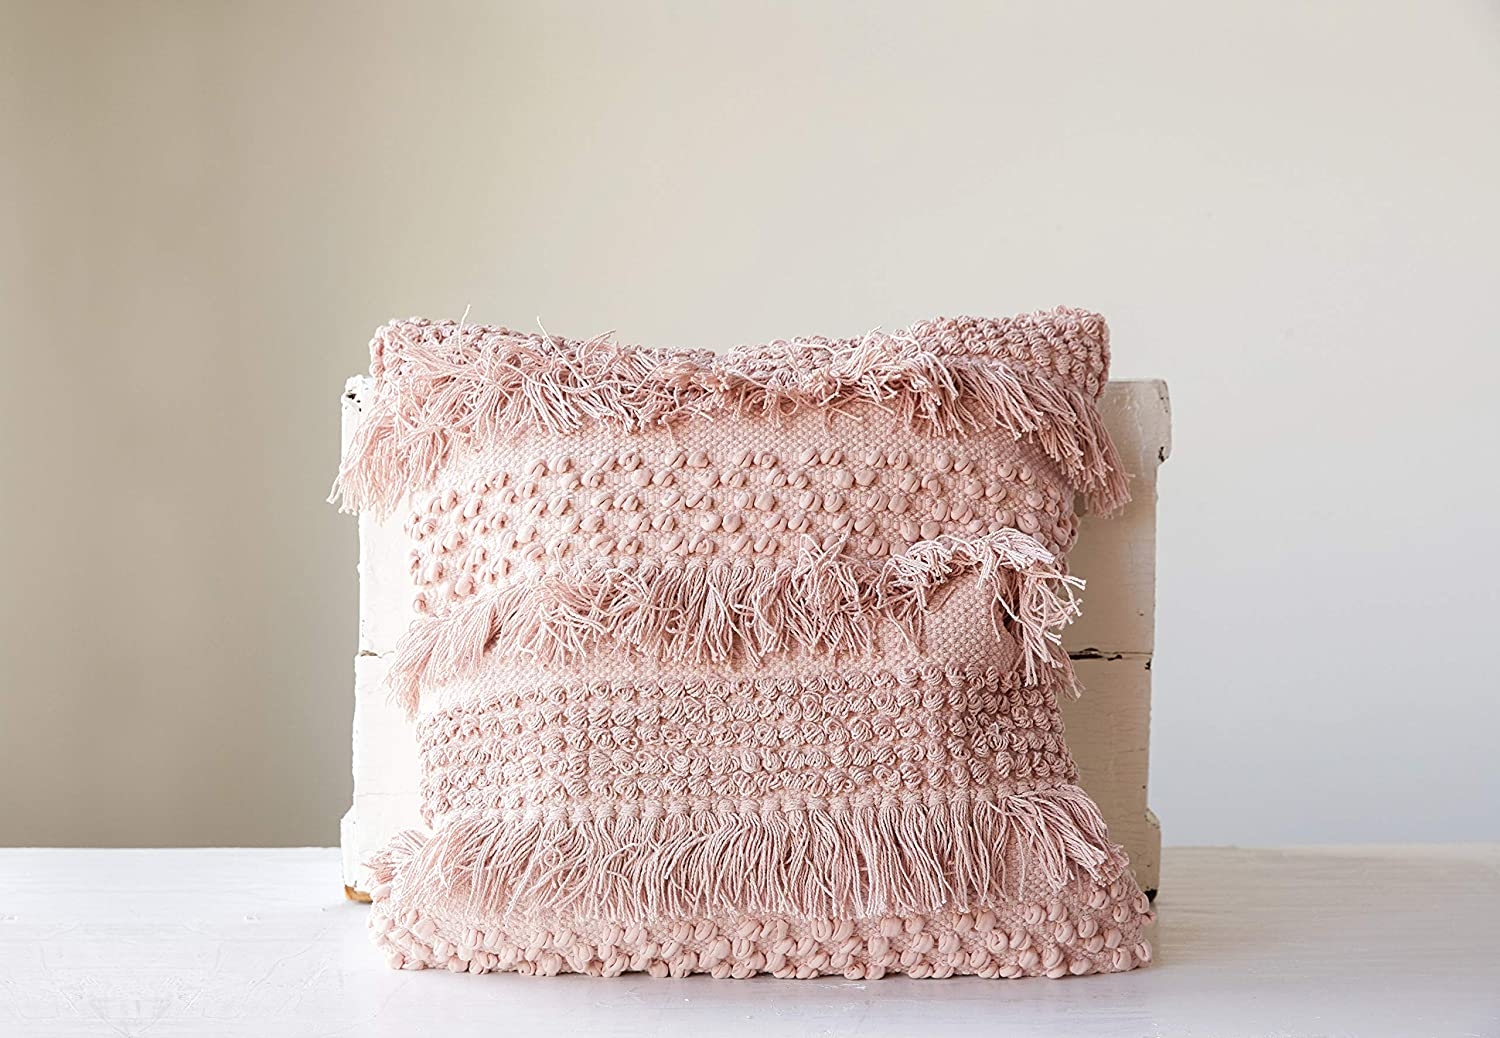 Square Pink Pillow with Fringe and Multiple Designs with Varied Textures - Image 1